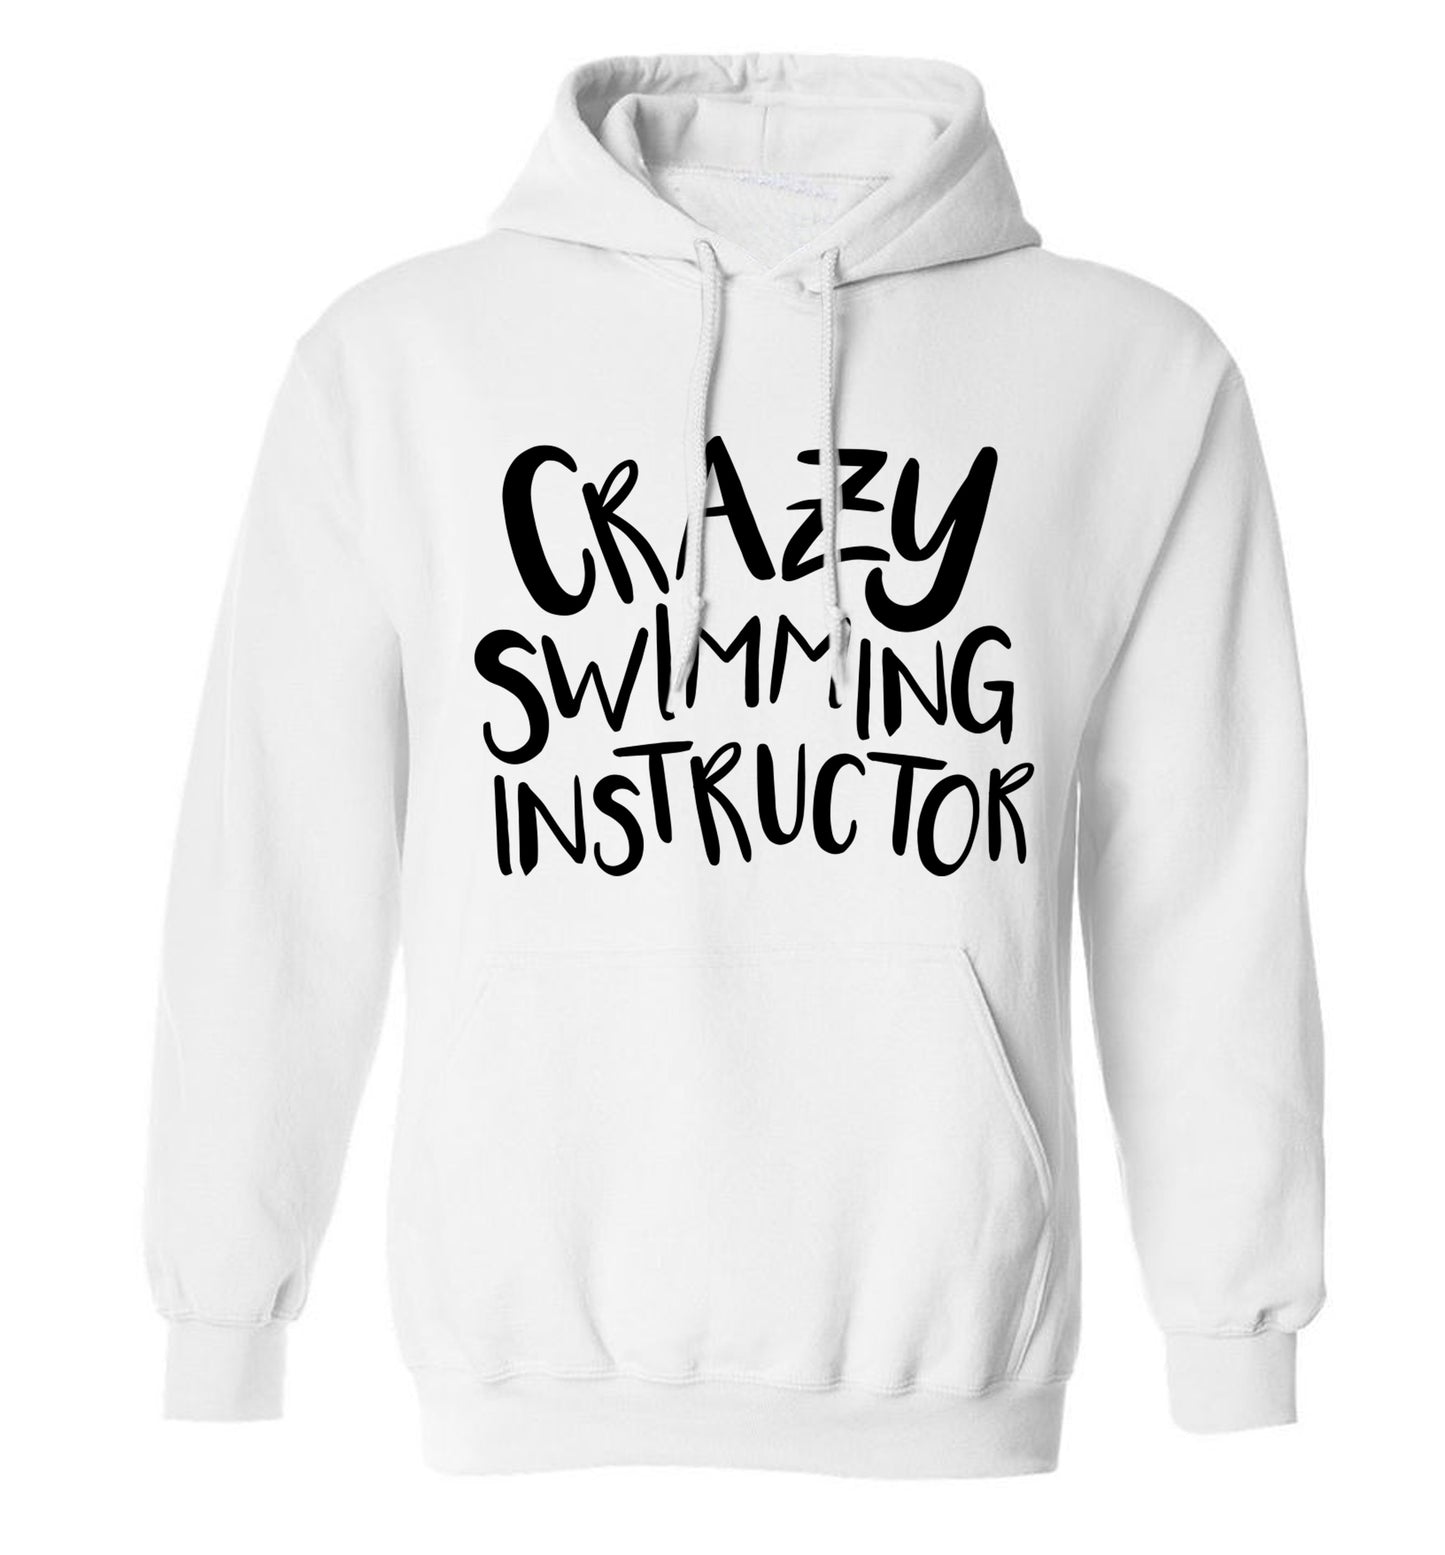 Crazy swimming instructor adults unisex white hoodie 2XL